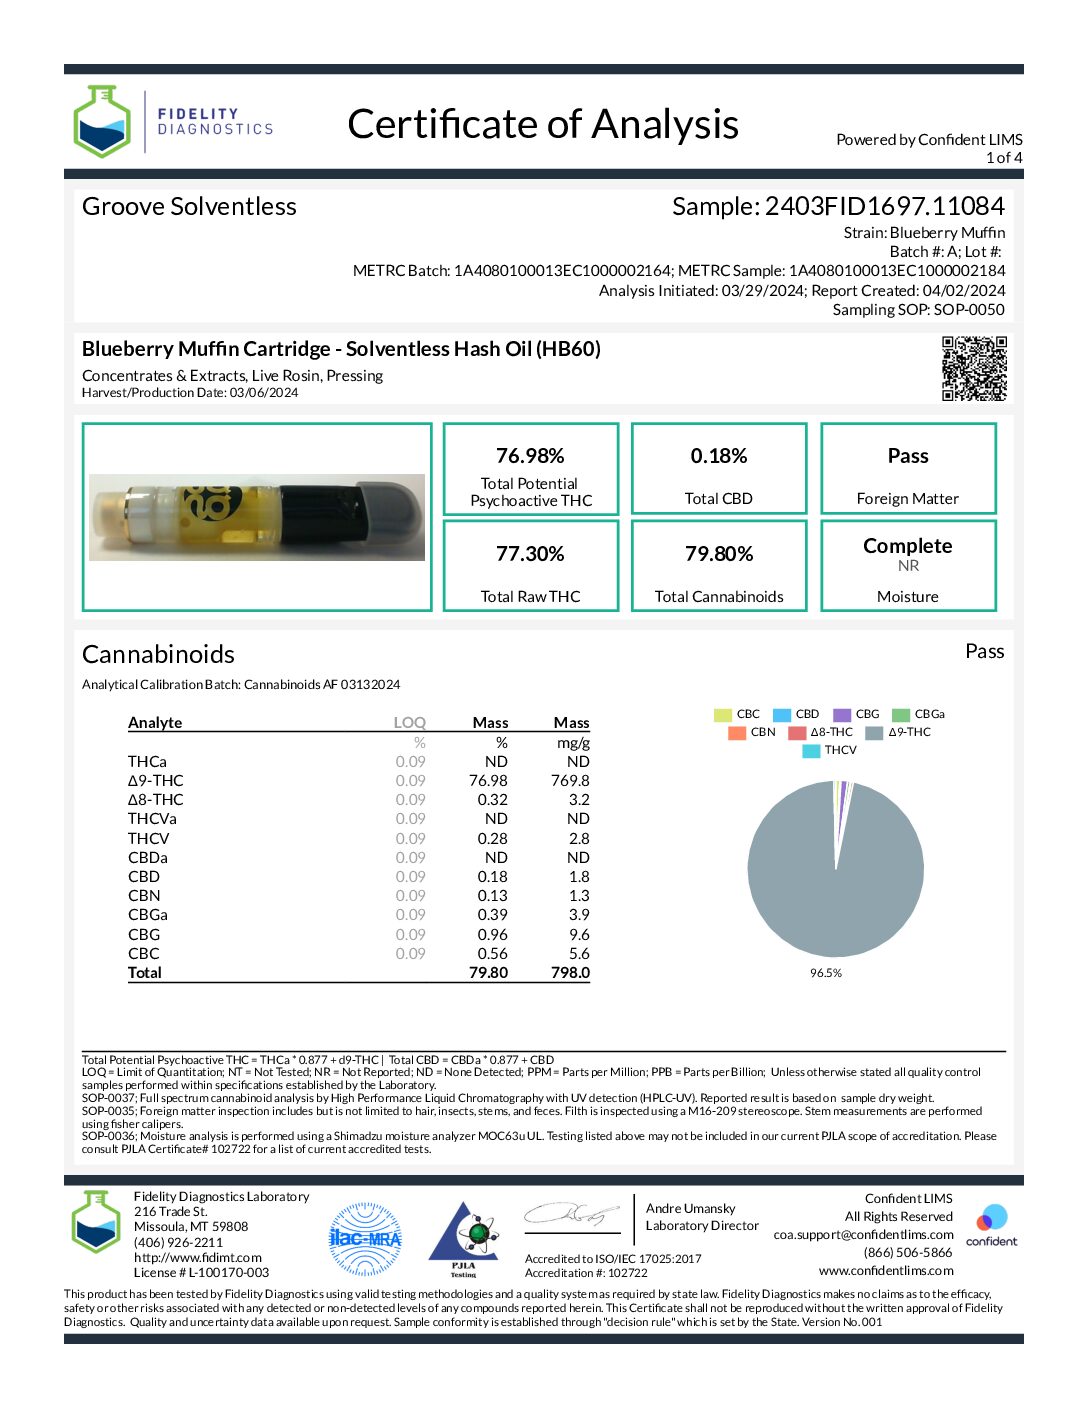 https://groovesolventless.com/wp-content/uploads/2024/04/Blueberry-Muffin-Cartridge-Solventless-Hash-Oil-HB60-pdf.jpg